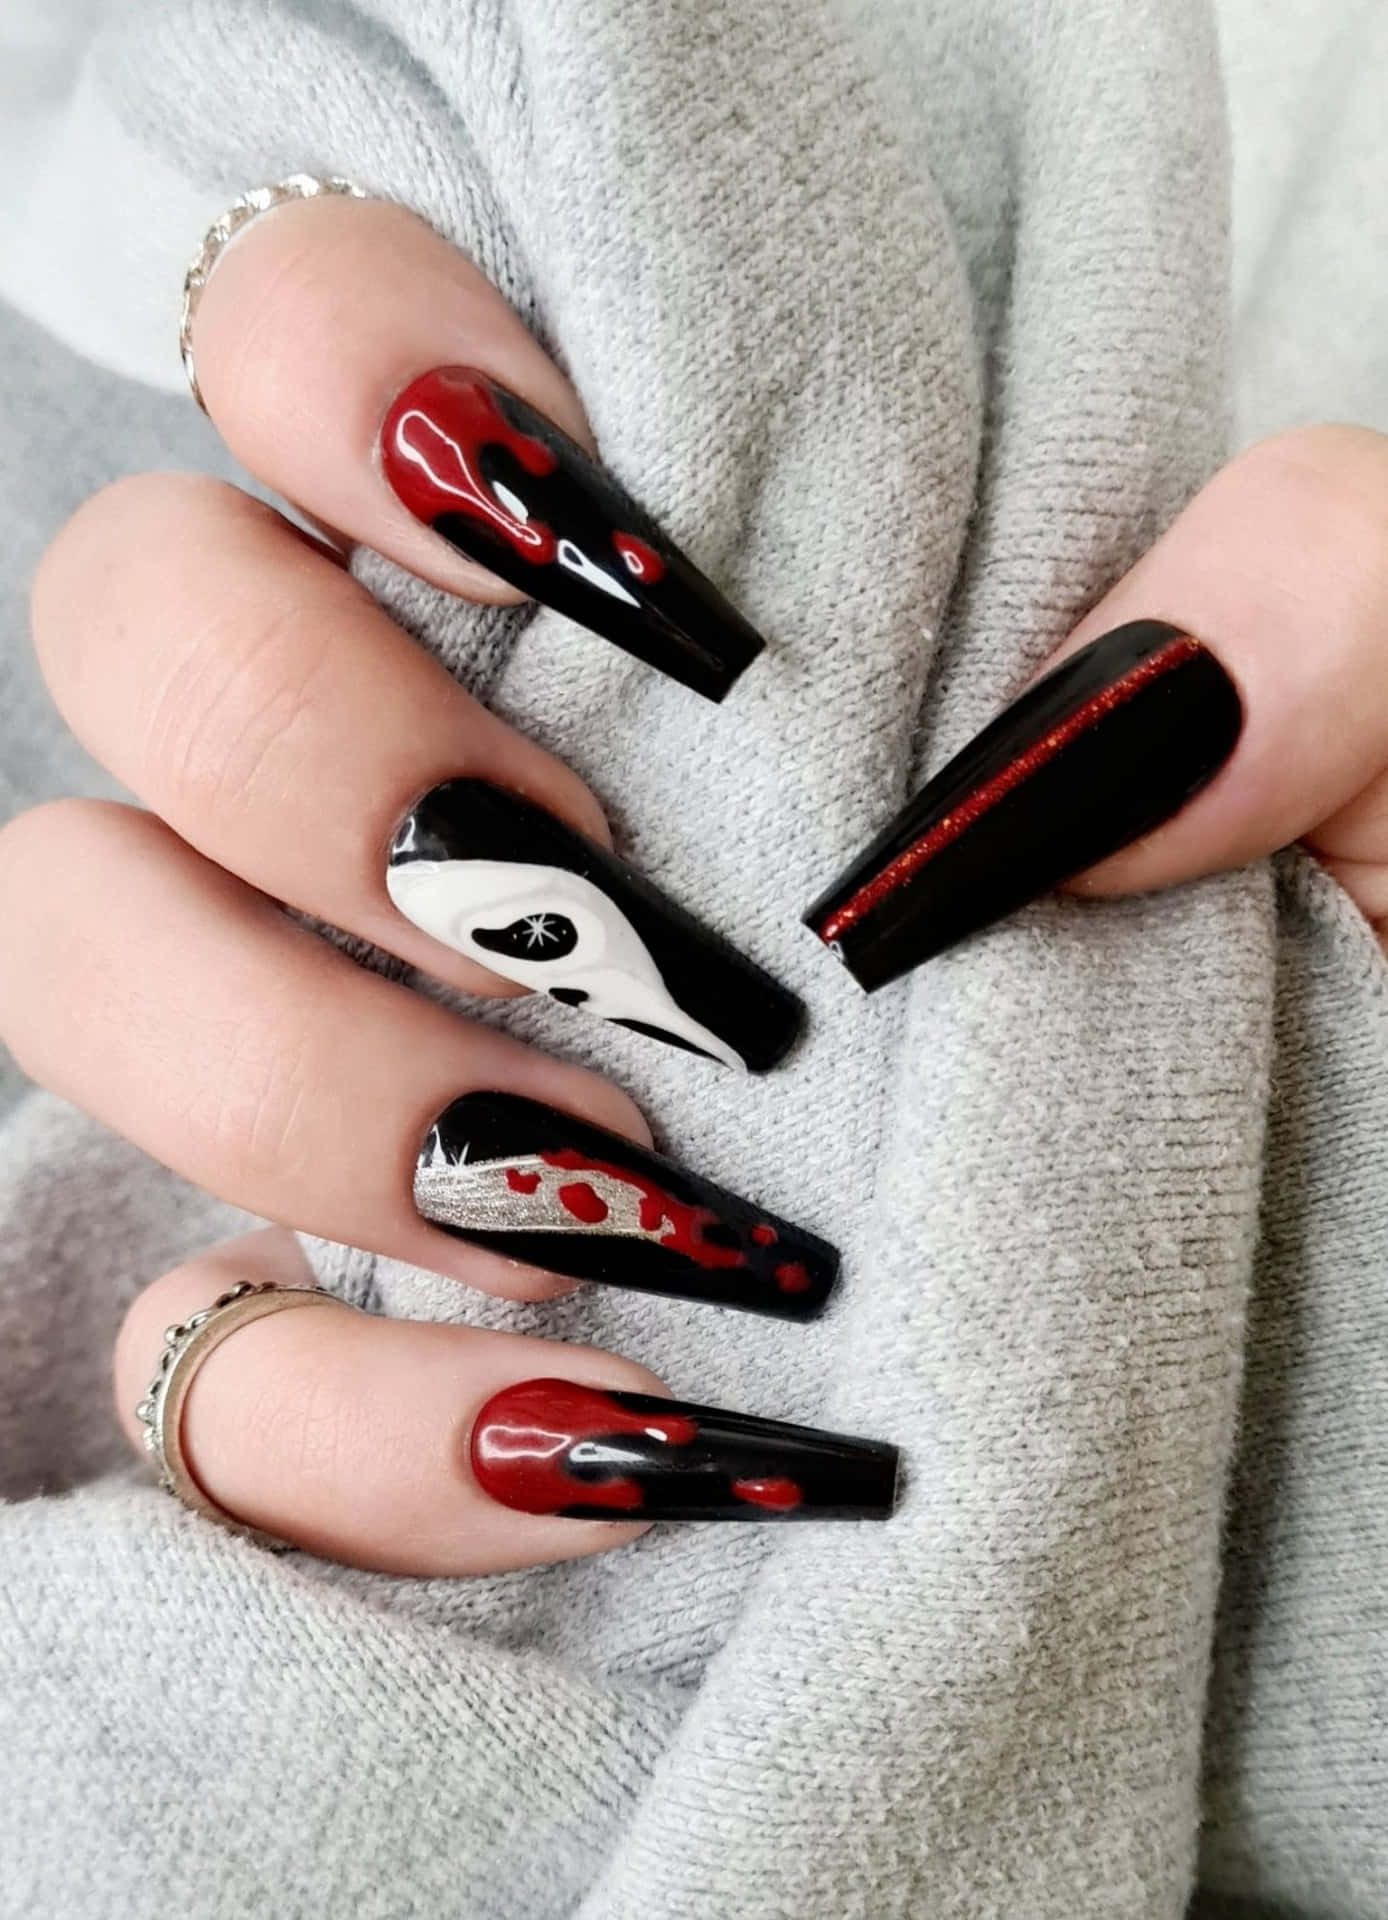 Get inspired this Halloween with these spooky nail art designs! Wallpaper